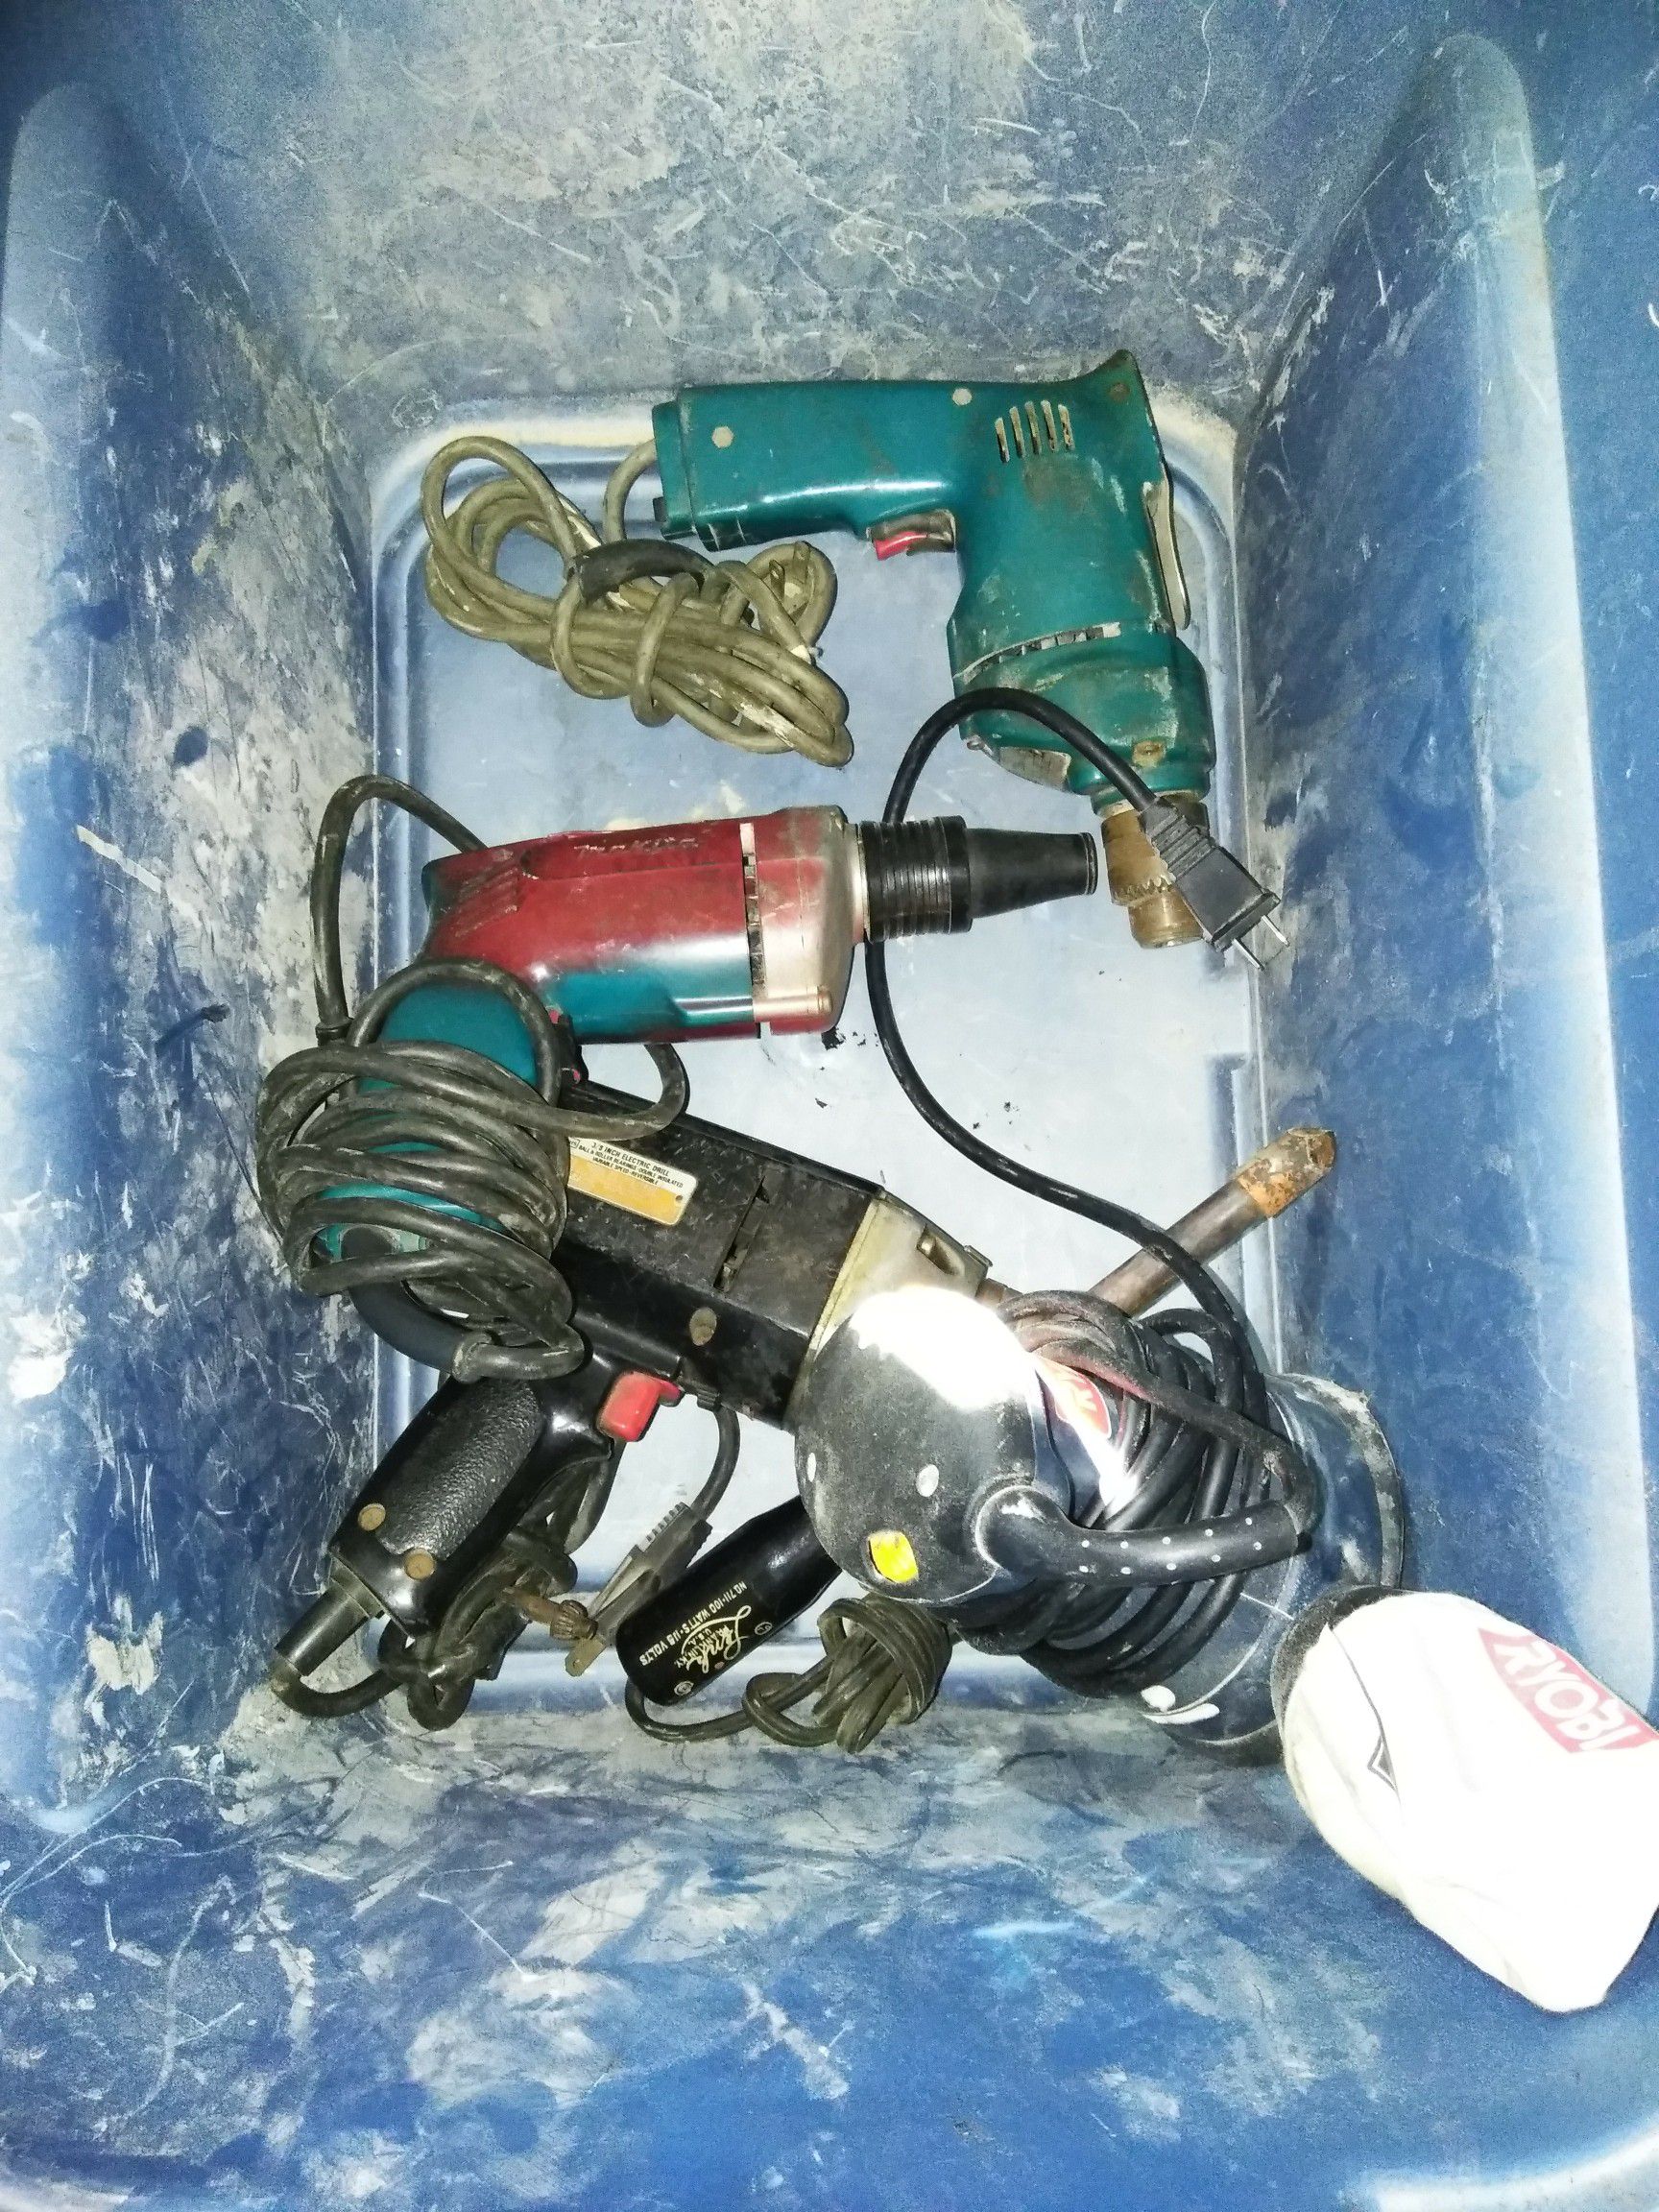 Power tools with cords